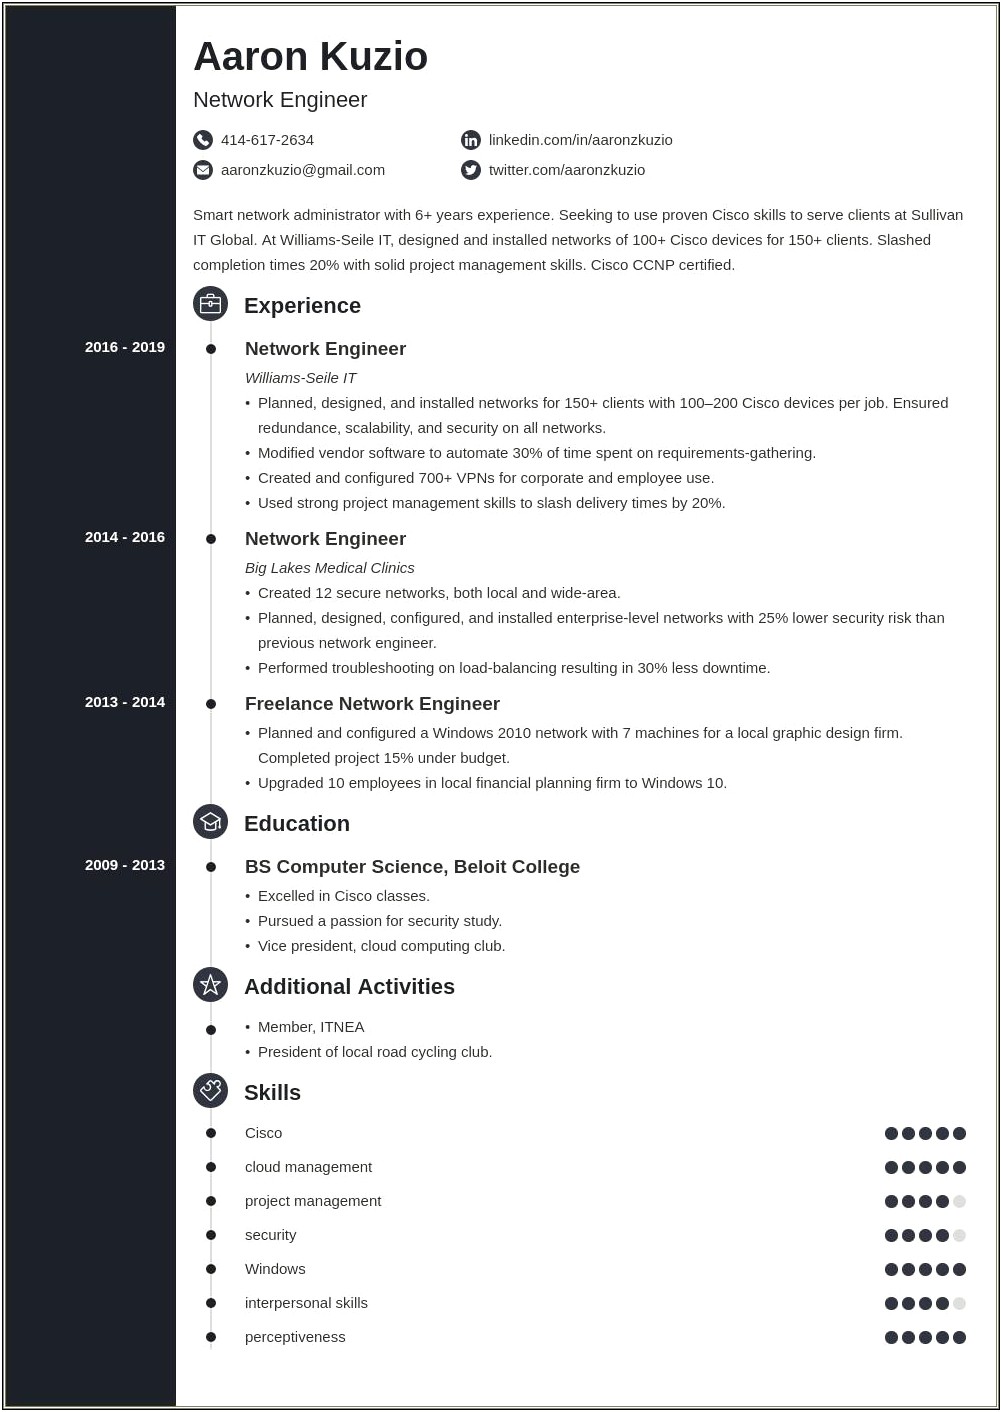 Network Engineer Resume With 1 Year Experience